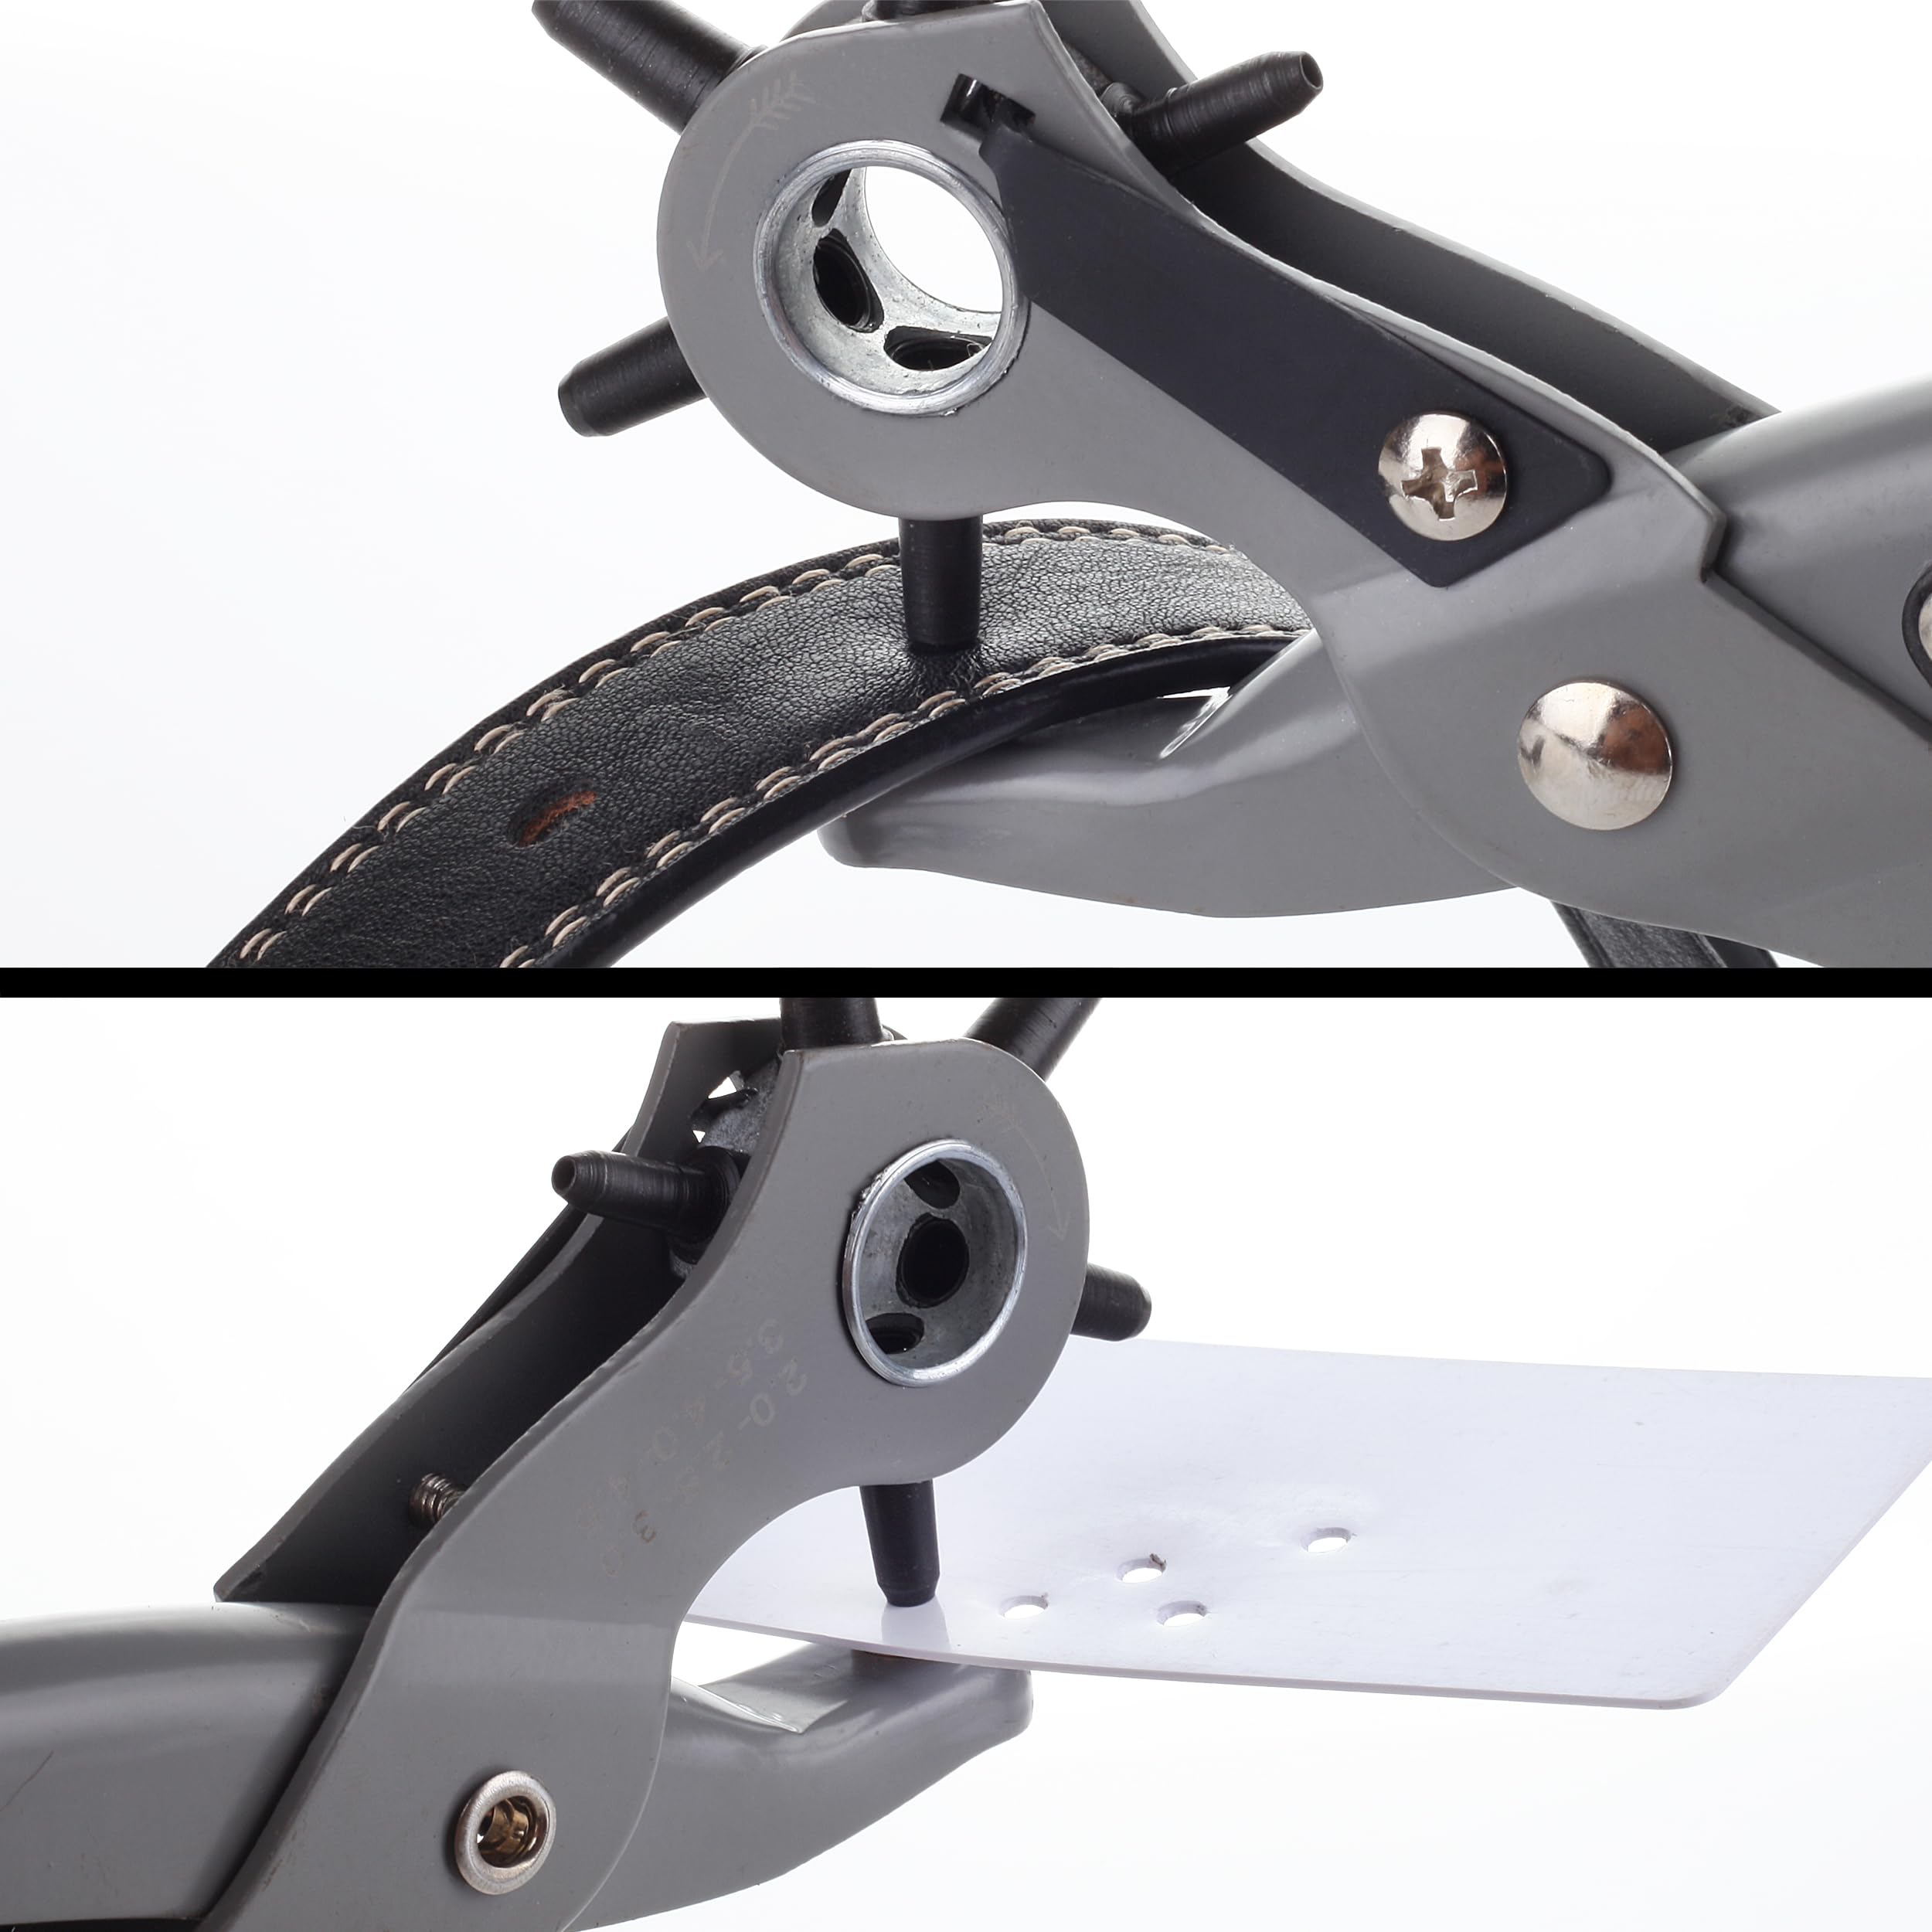 UNCO- Leather Hole Punch Tool, Multi Hole Sizes for Belts and Leather